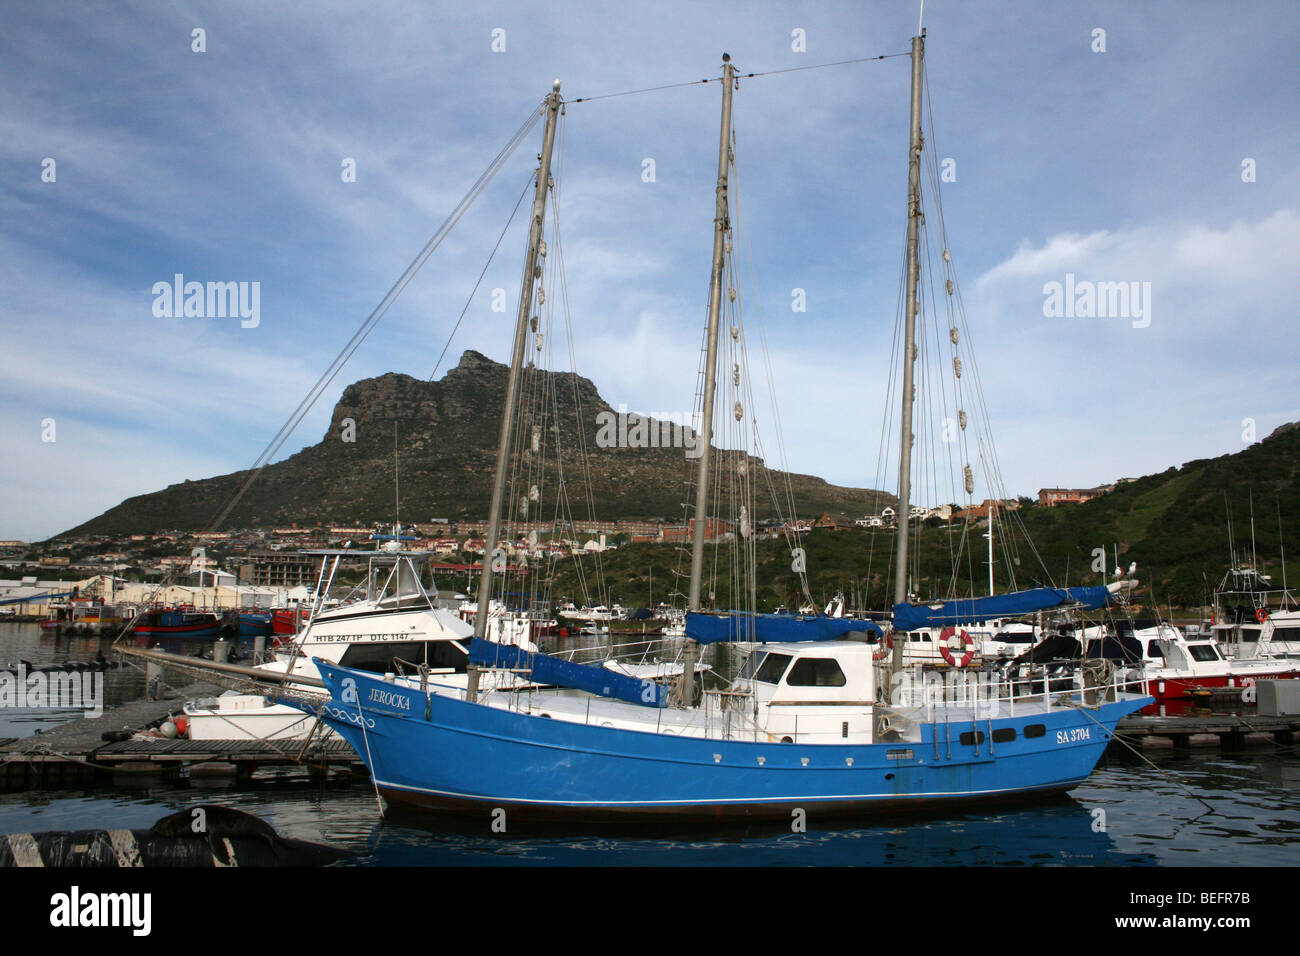 A Yacht In The Harbour At Hout Bay With Sentinel Peak In The Distance, South Africa Stock Photo